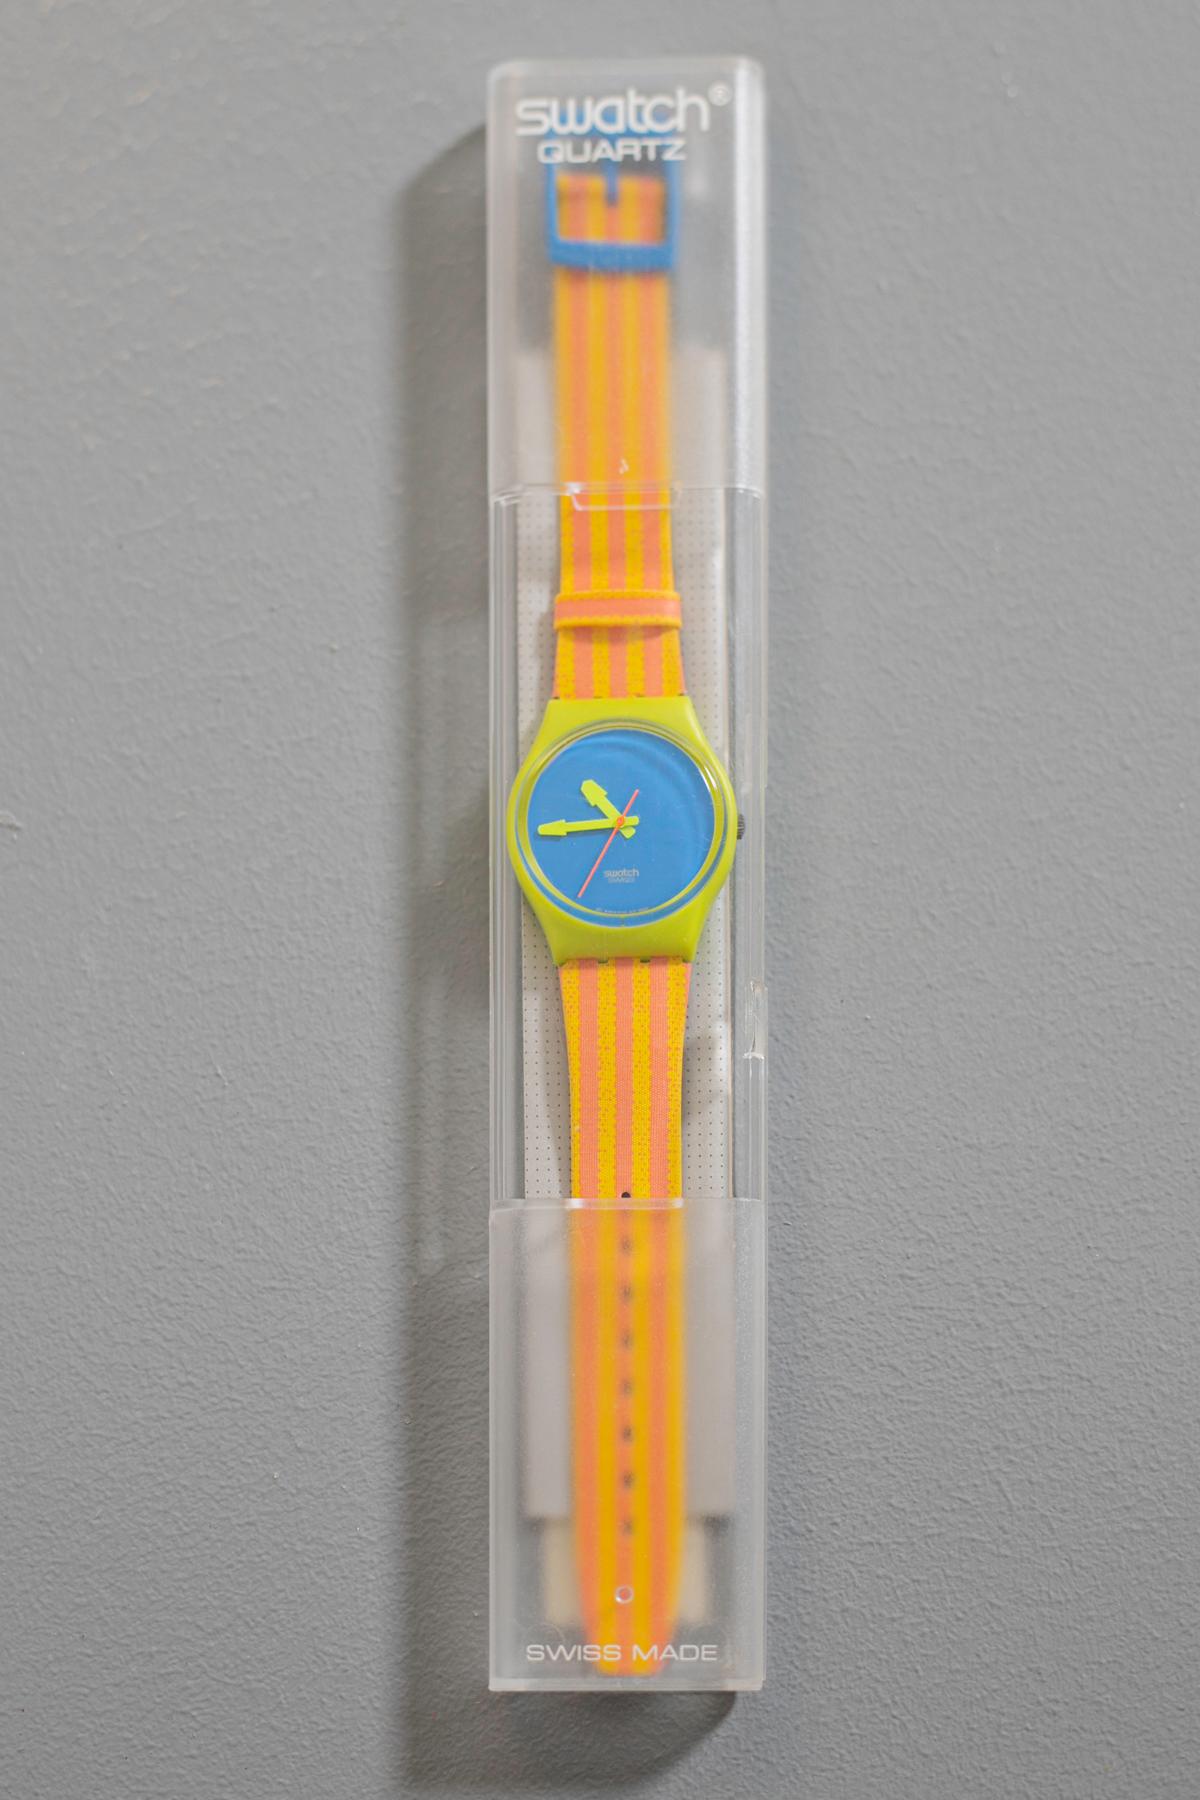 Beautiful vintage Swatch from the 1993 collection. I don't know about you but as soon as I look at it, the fantasy of a deckchair by the sea comes to mind, the colors are a hymn to summer, sun and heat. Thanks to its simple design and bright colors